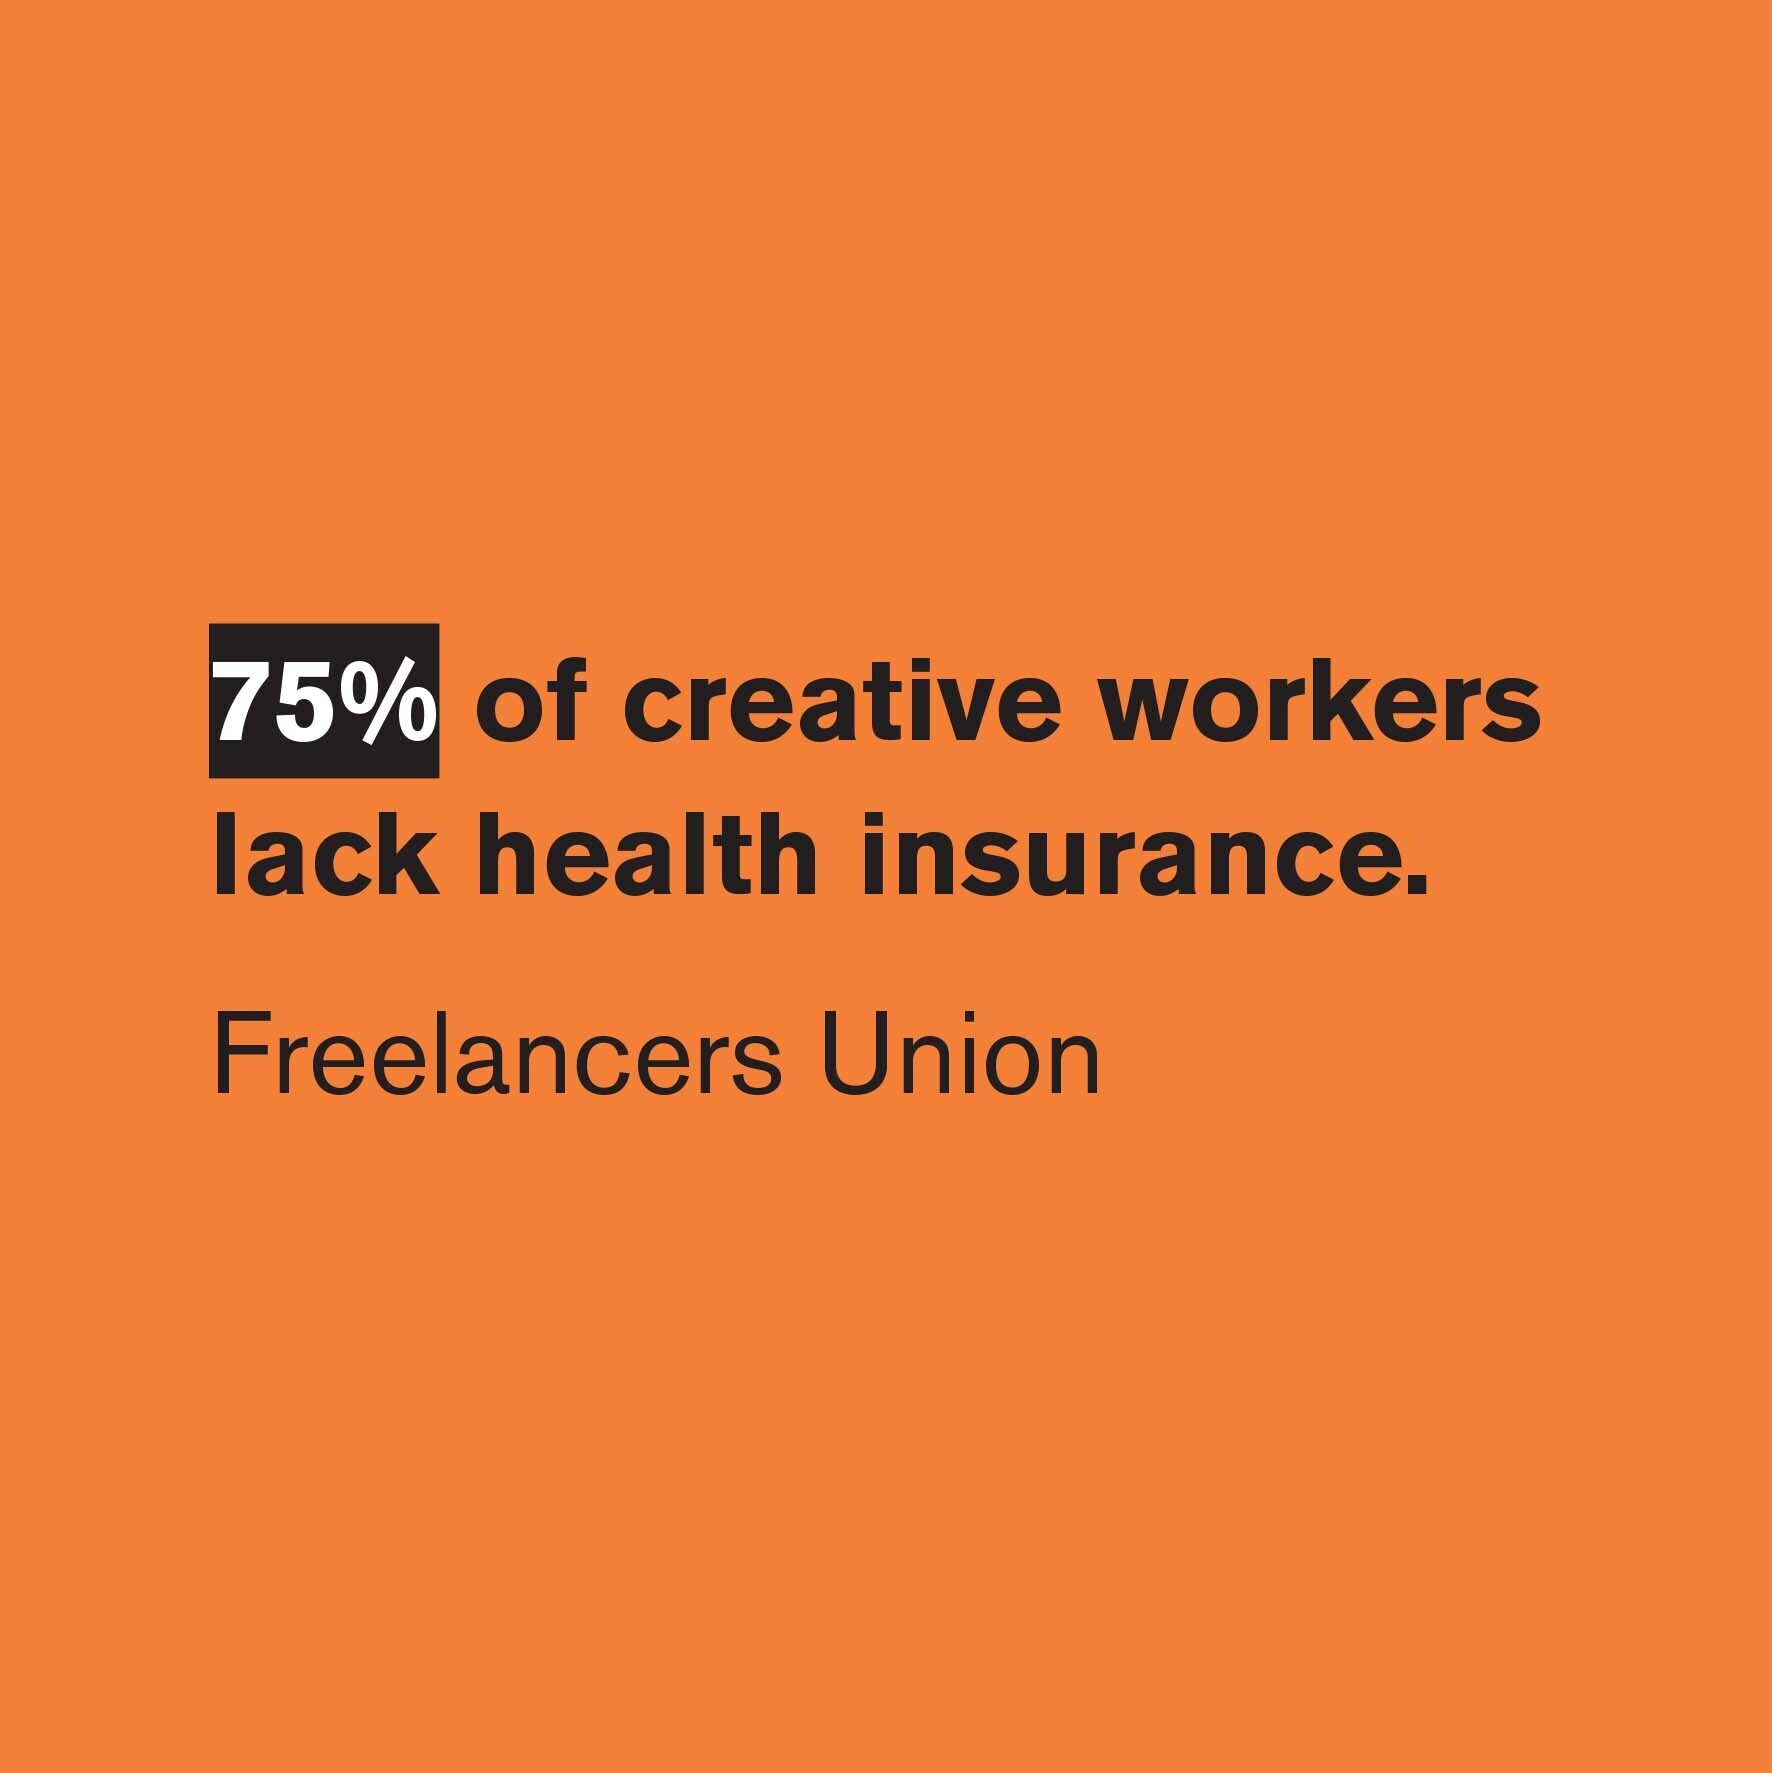 75% of creative workers lack health insurance (Freelancers Union)